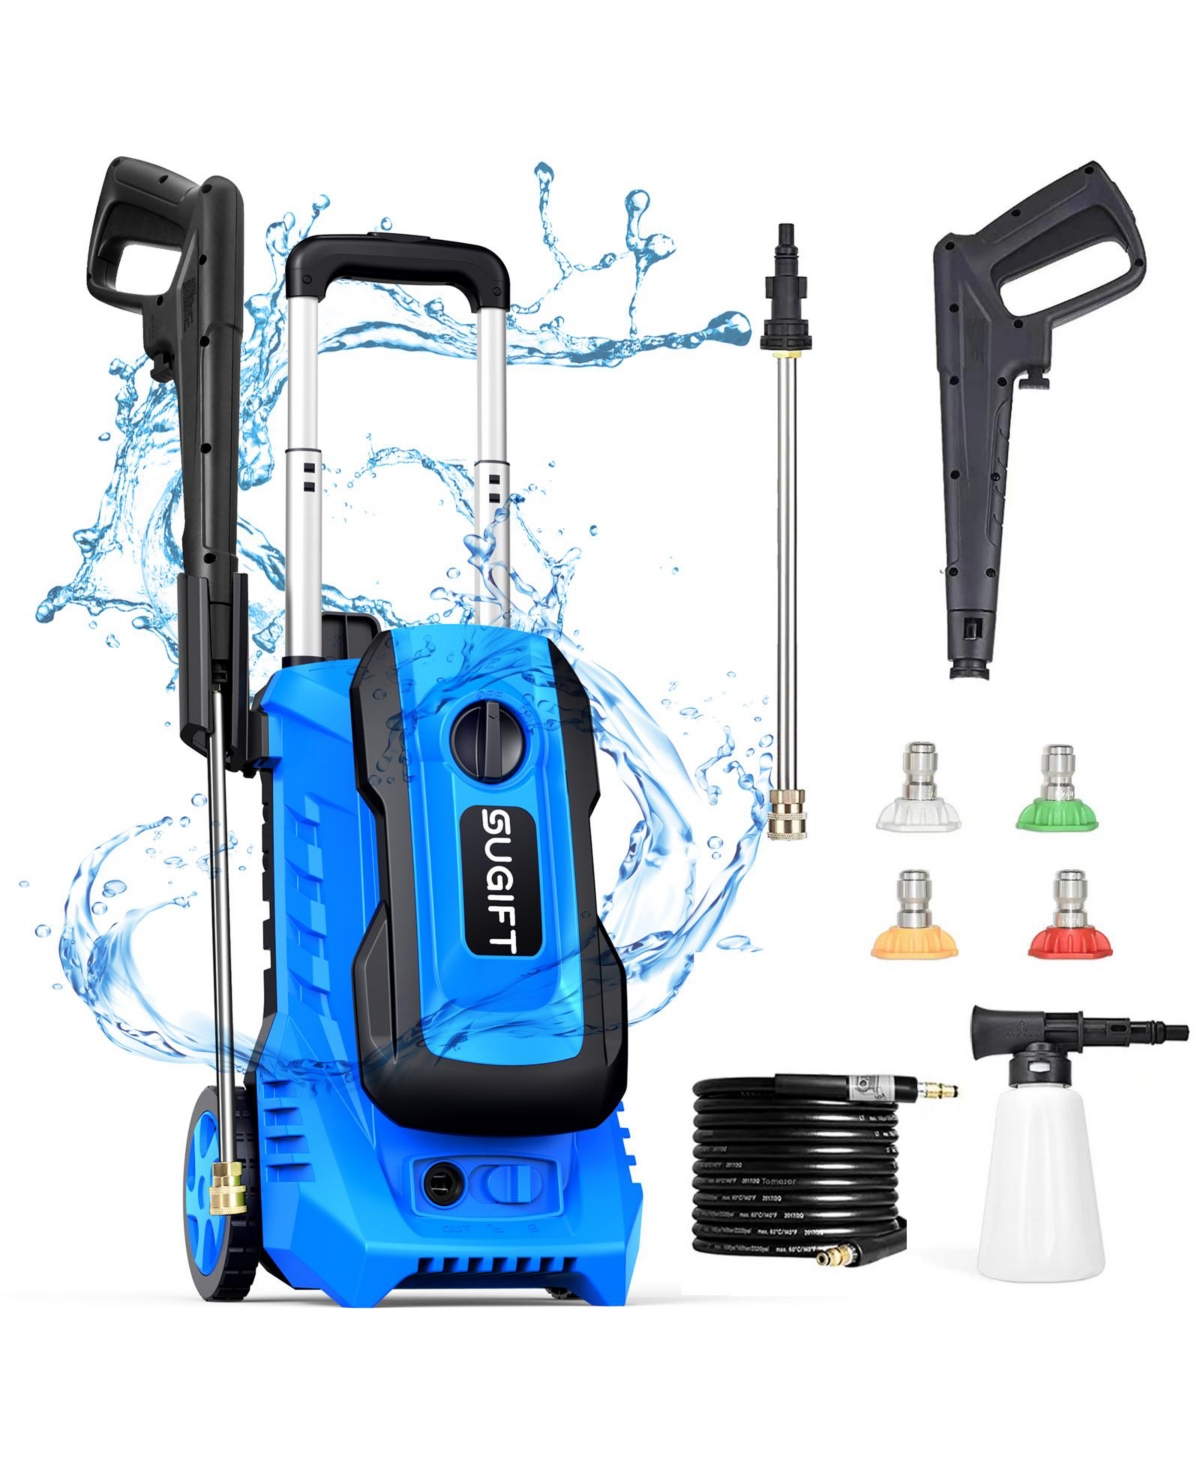 2600 Max Psi 1.8 Gpm Electric High Pressure Washer, Cleans Cars/Fences/Patios - Blue